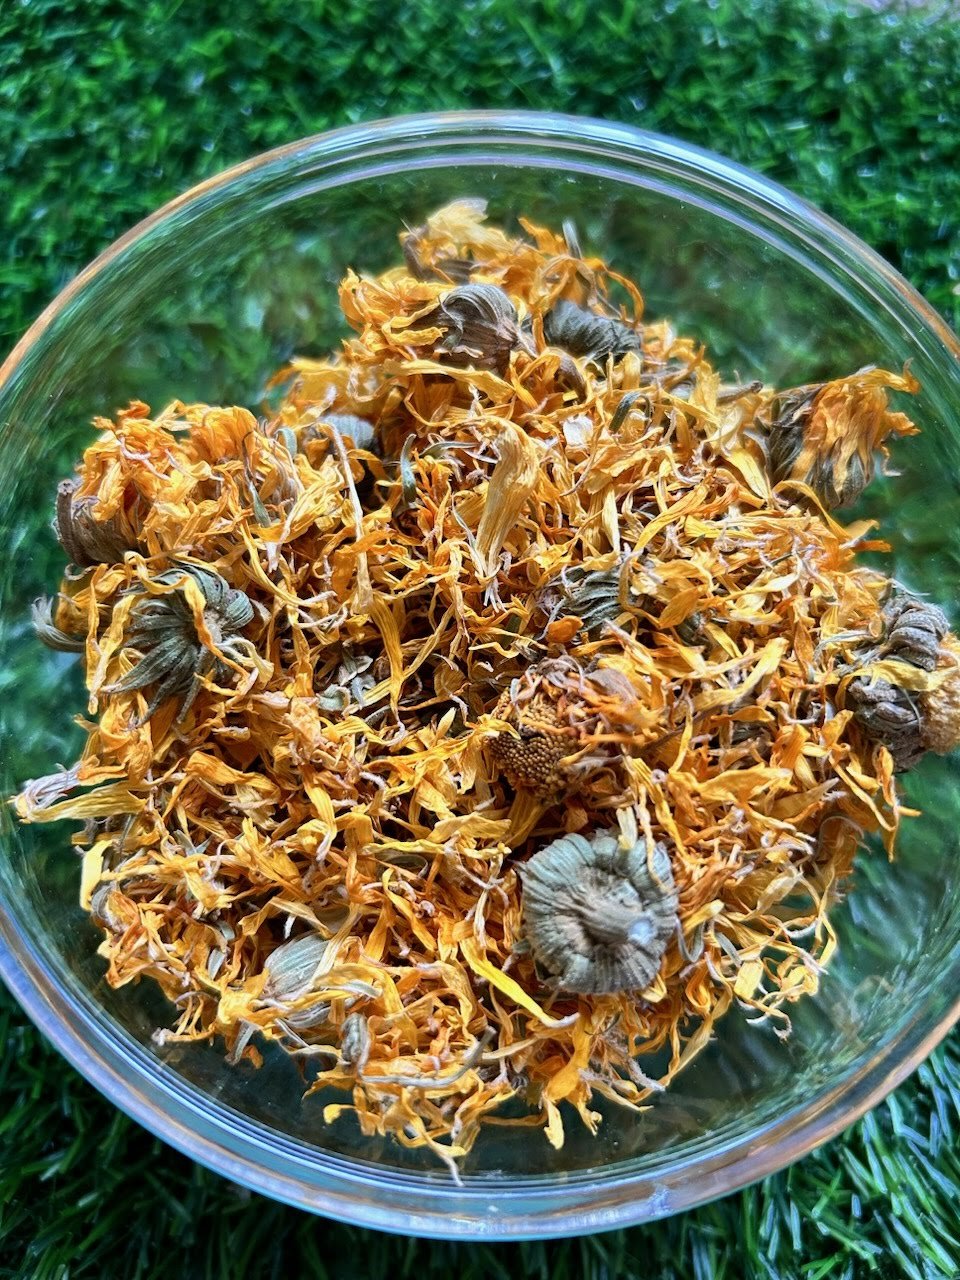 100G Dried Calendula Flowers Whole Natural Flowers for Gift Free Shipping  Dried Calendula Officinalis Flower Buds&Marigold